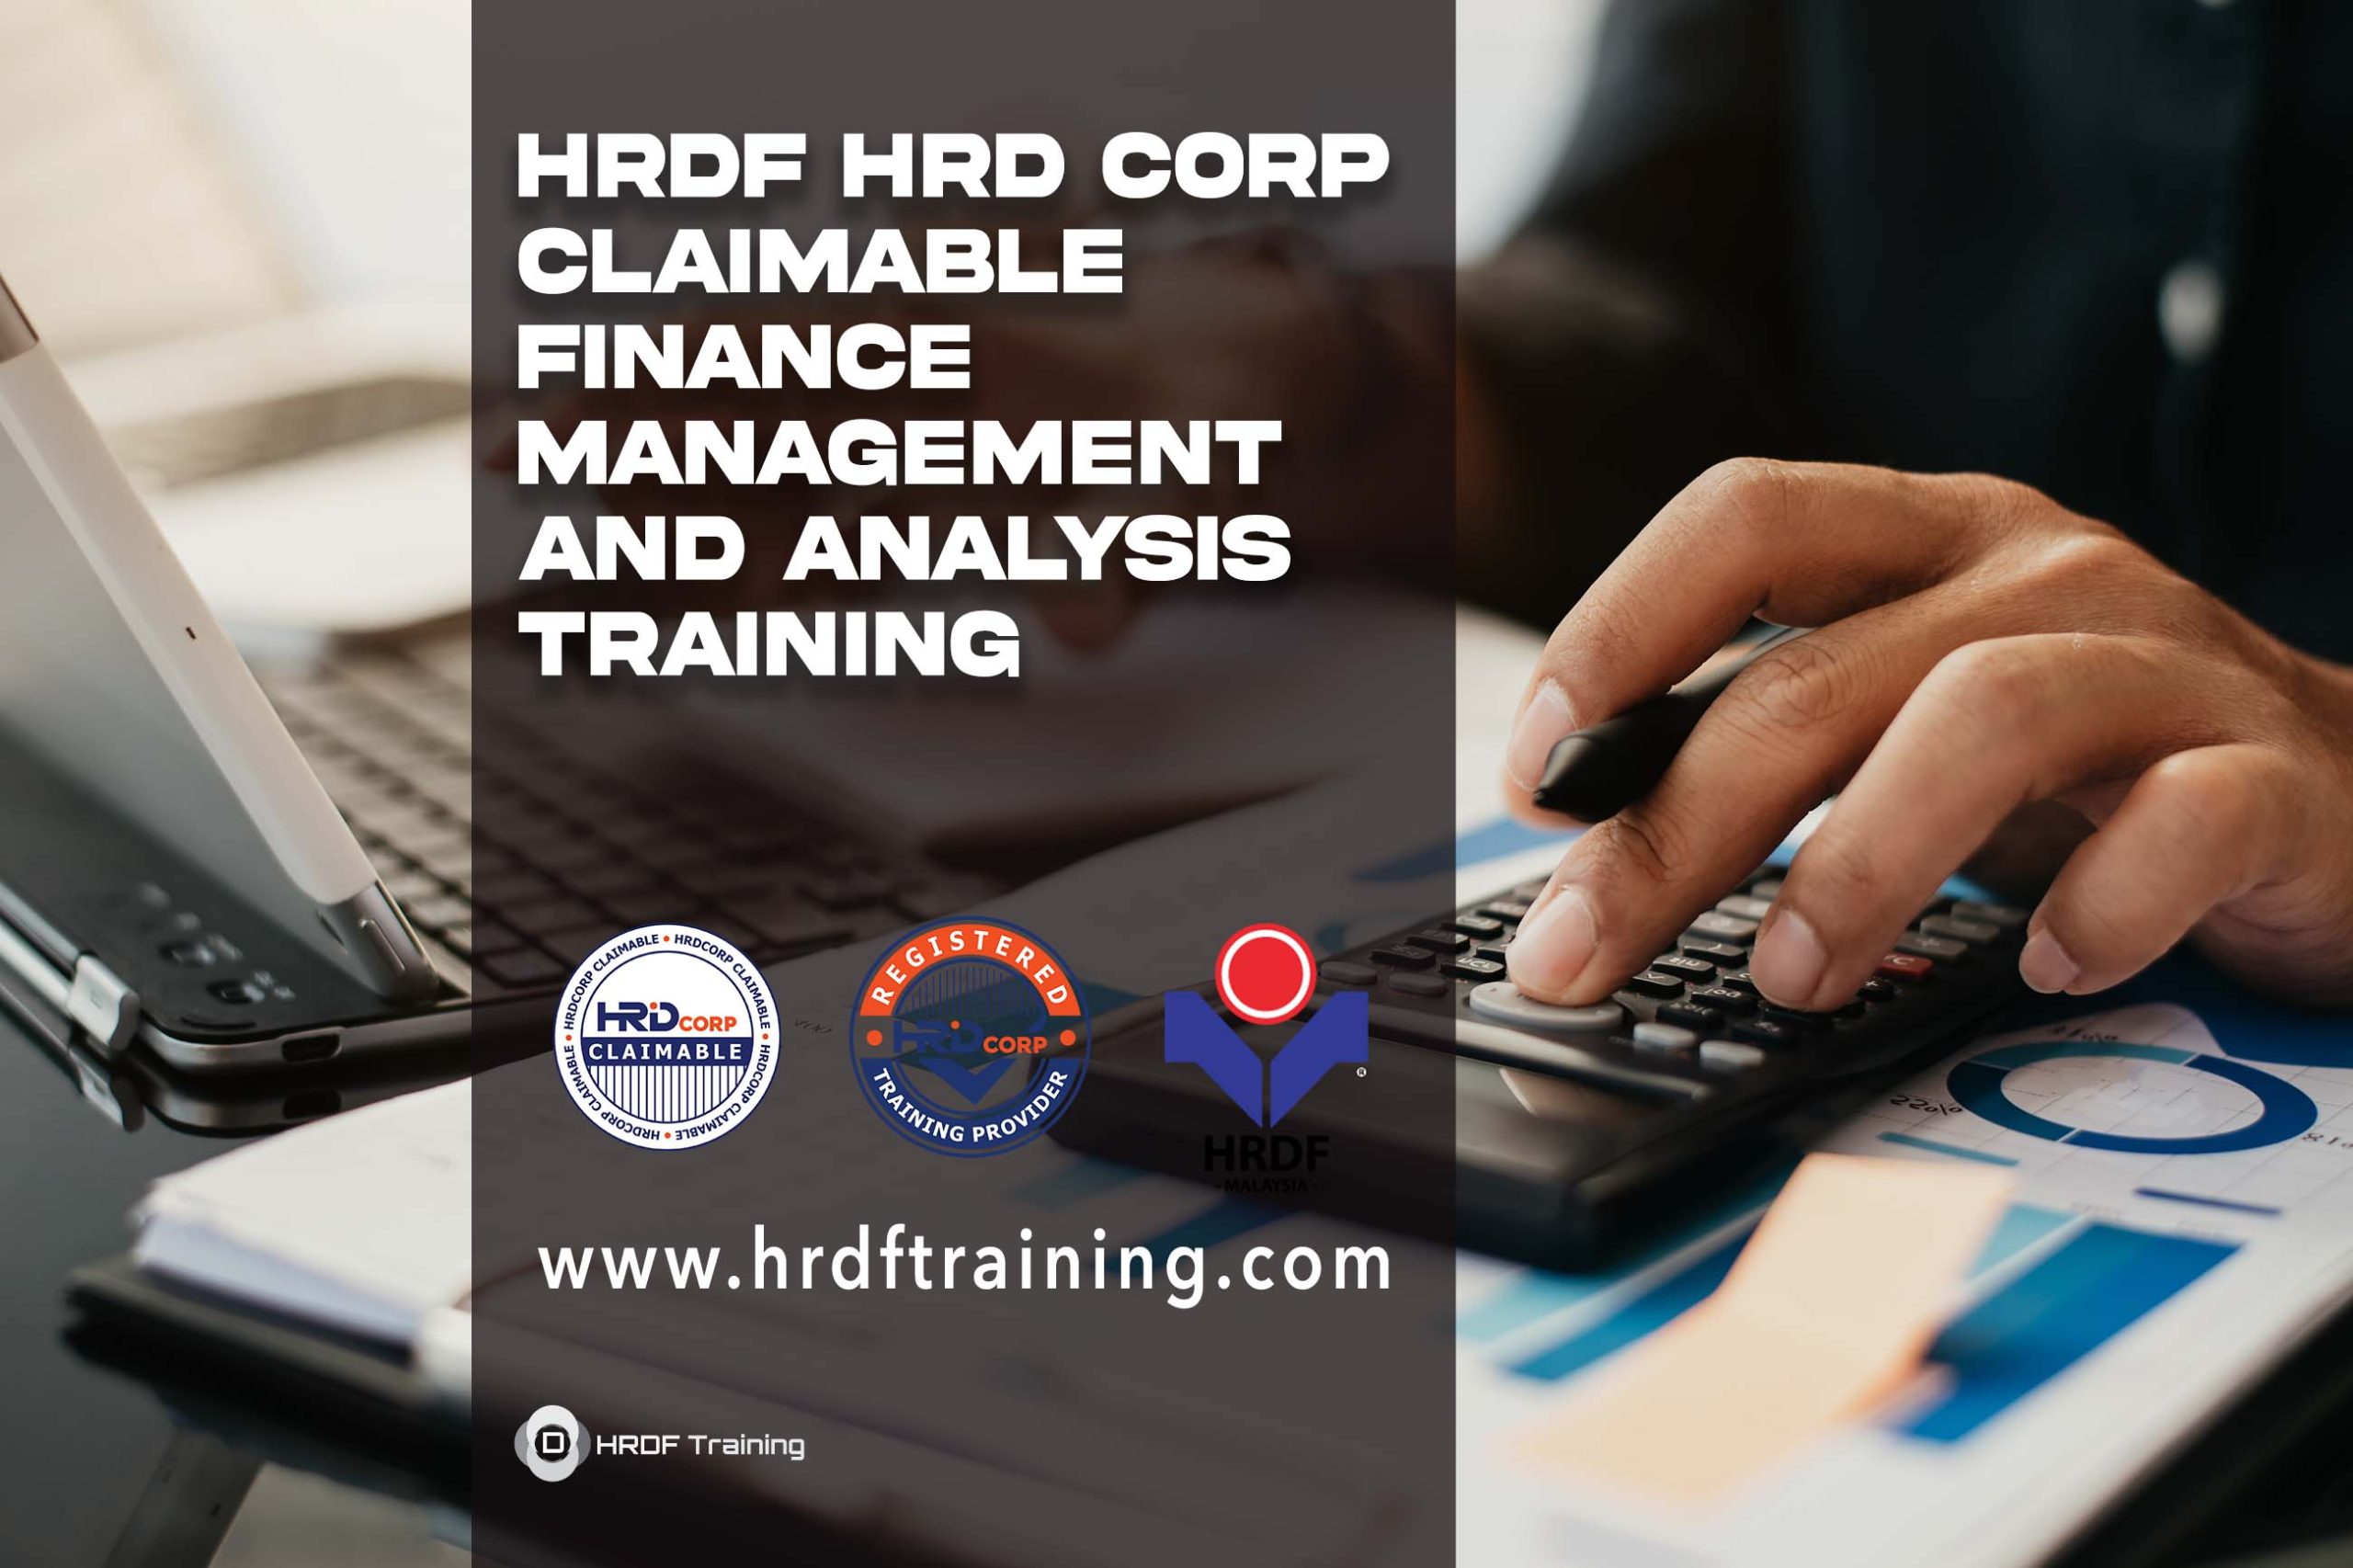 HRDF HRD Corp Claimable Finance Management and Analysis Training